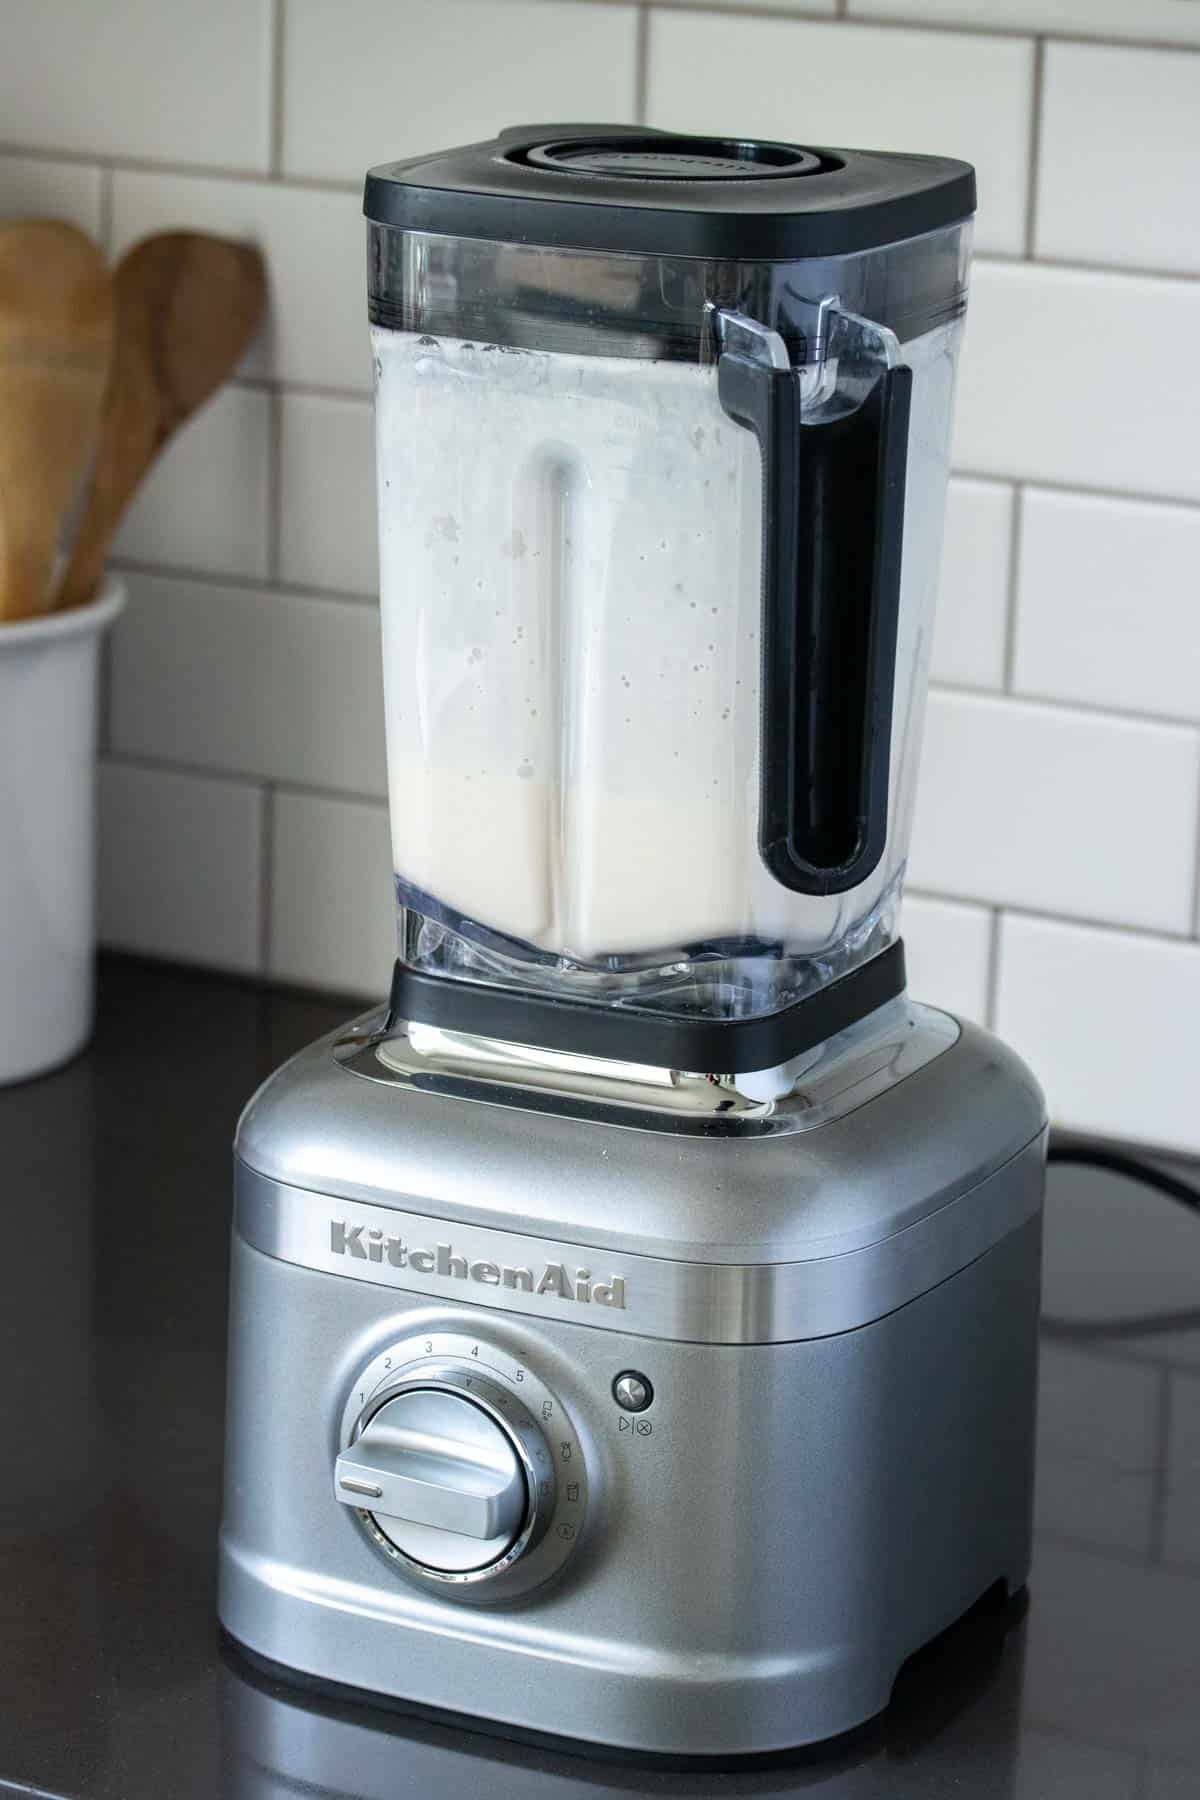 A silver based blender on a grey countertop with white liquid in it.